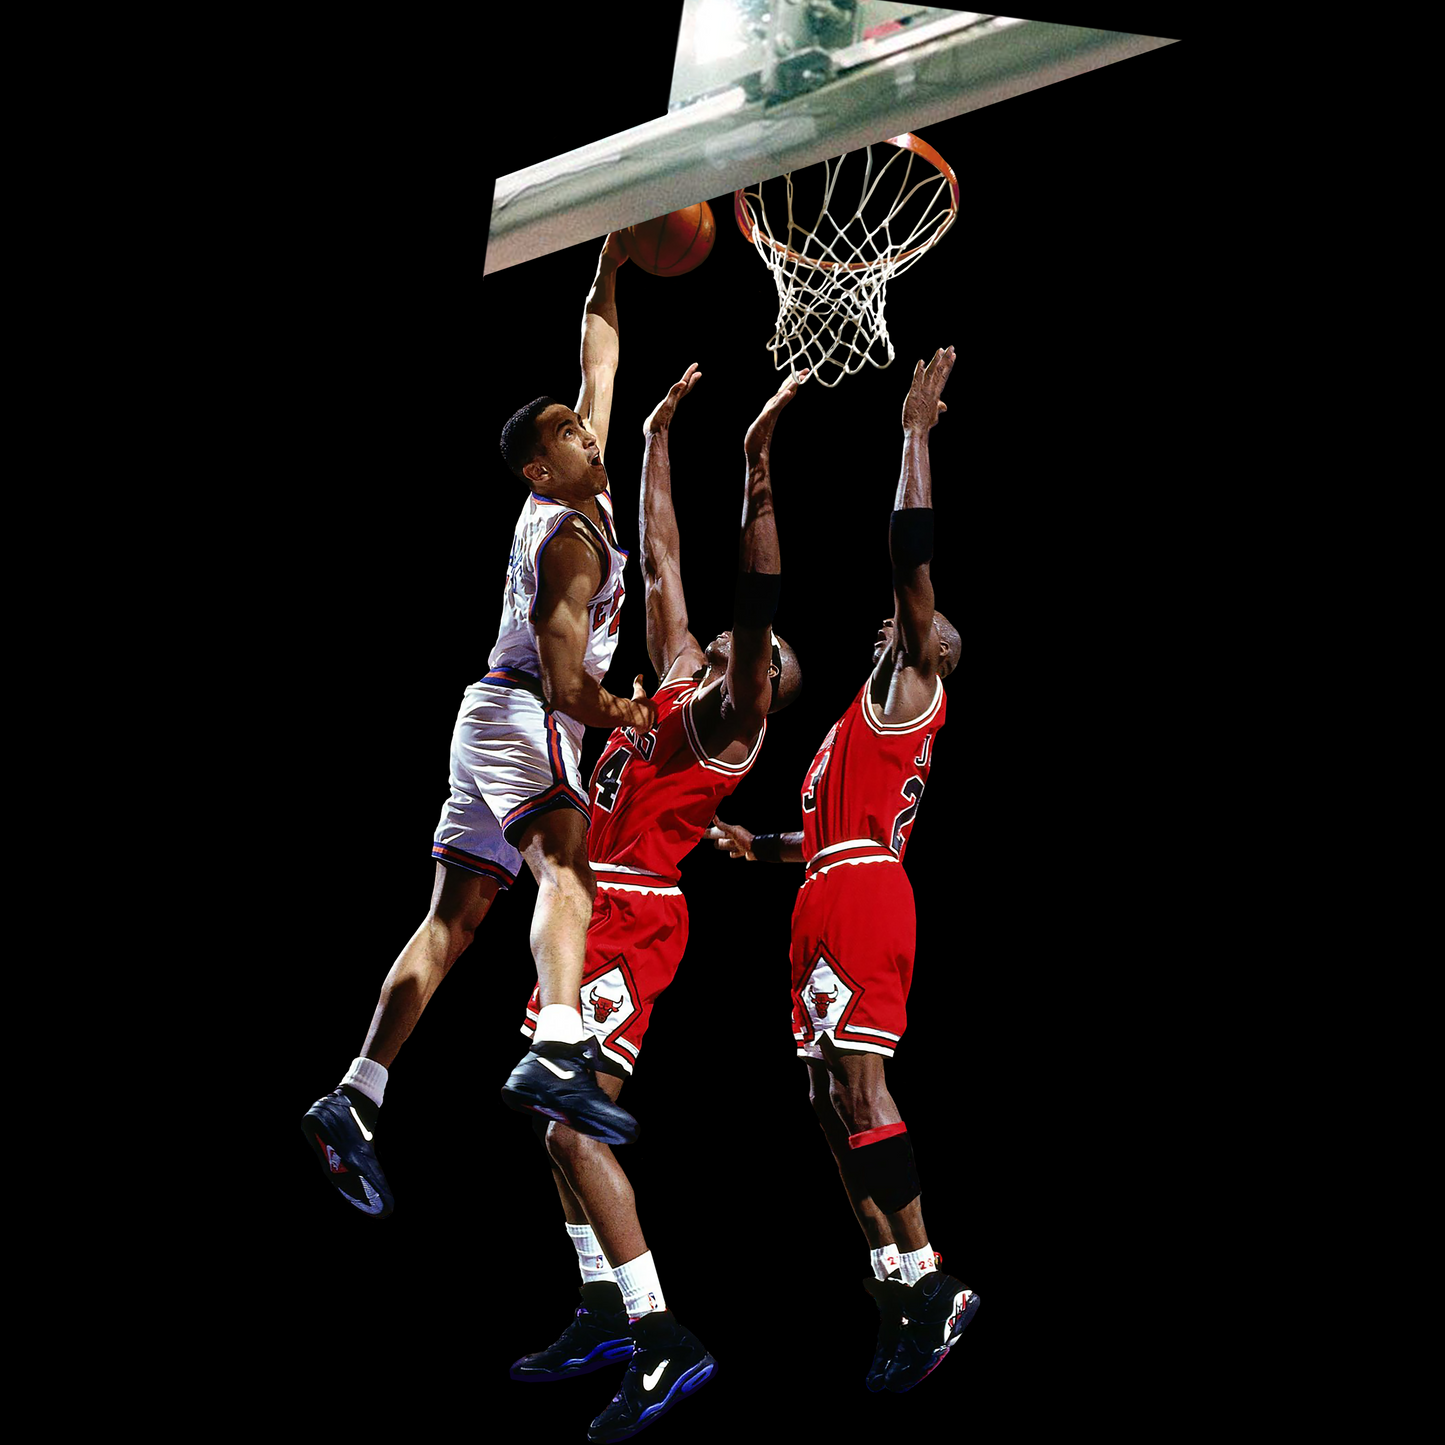 Iconic NYC Moments in Sports Series - John Starks "The Dunk"